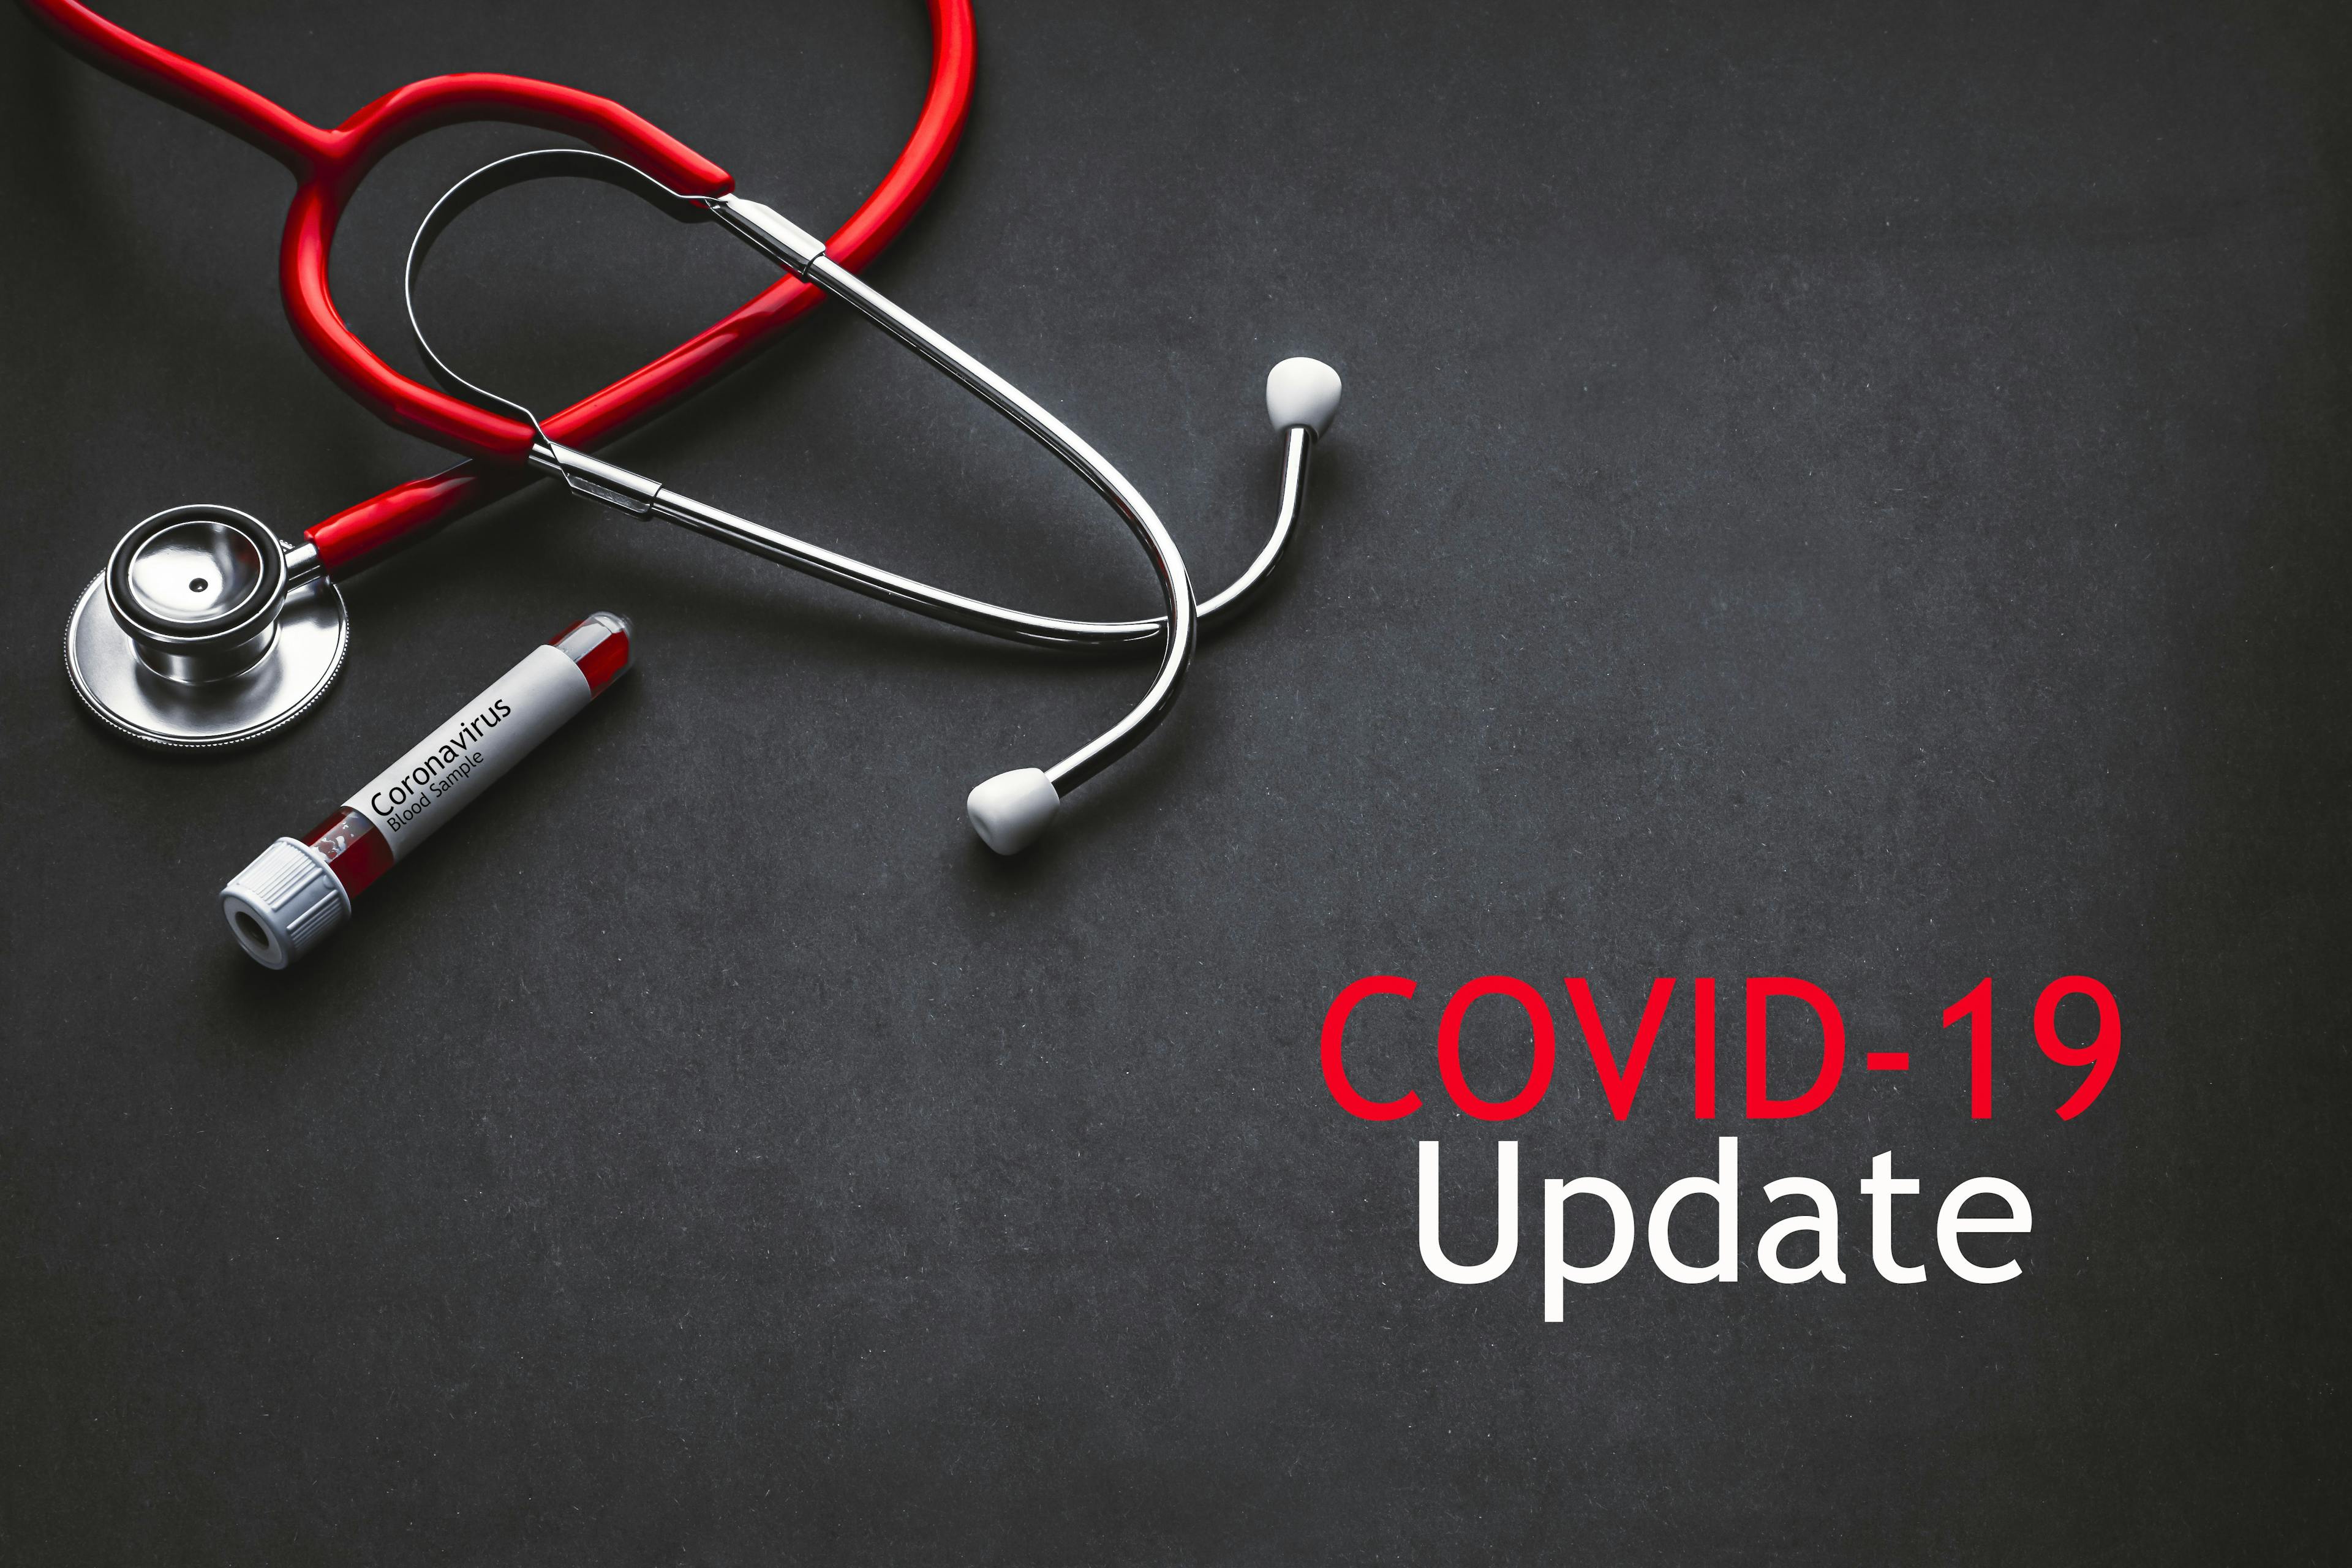 COVID-19 Update: Global Cases and Recoveries as of May 27, 2020